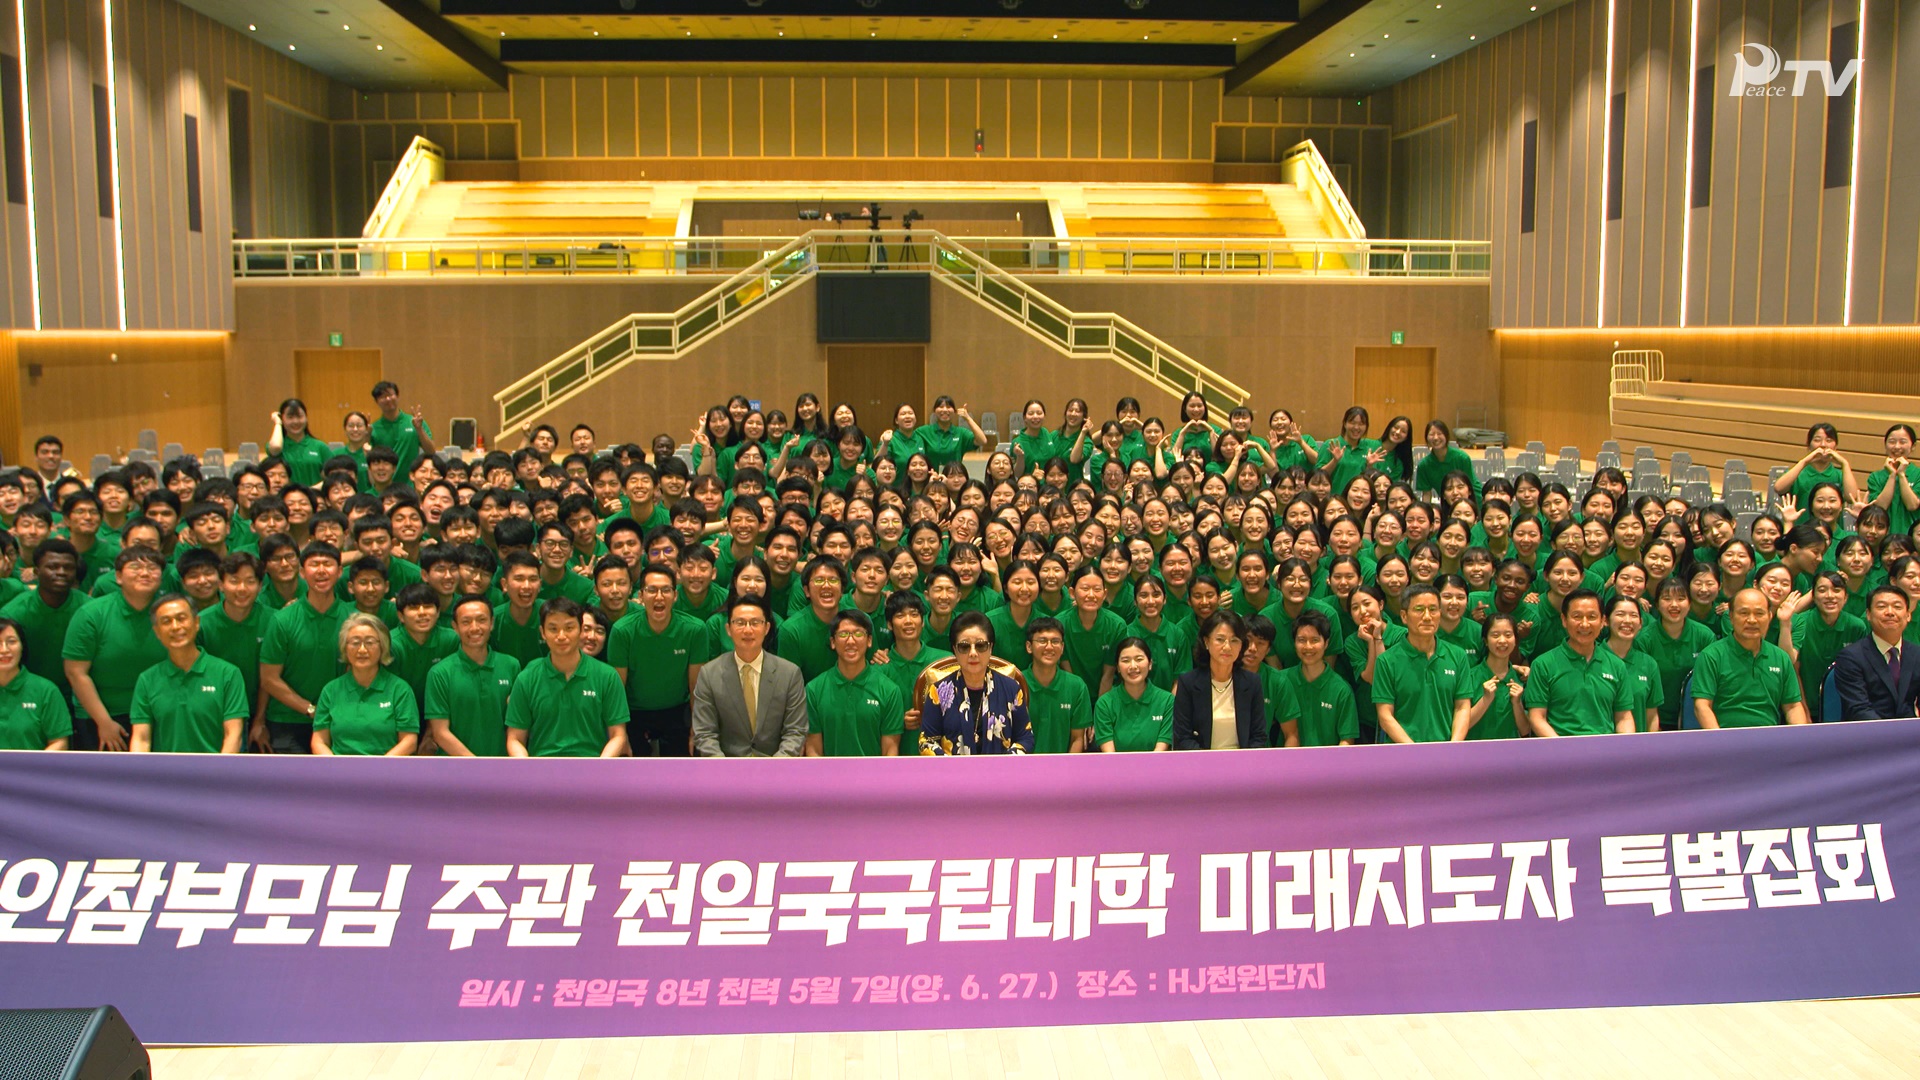 Special Gathering for Future Leaders of Cheon Il Guk National University (June 27, 2020, Hyo Jeong Culture Center)